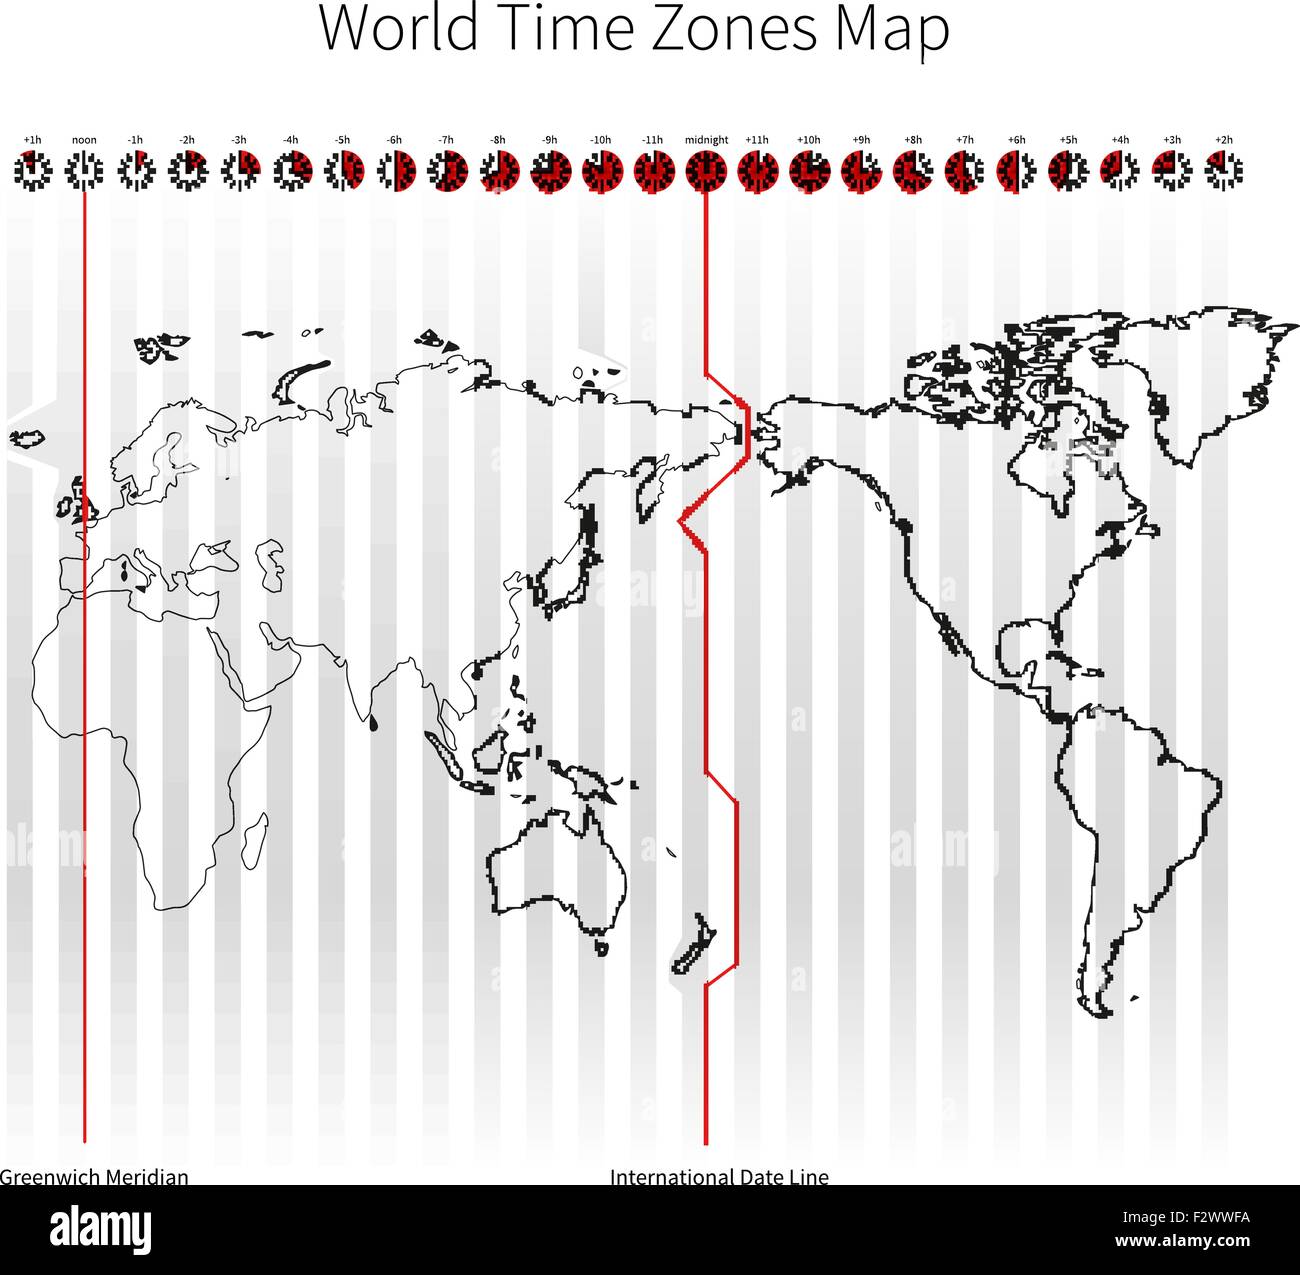 World Time Zones Map Stock Vector